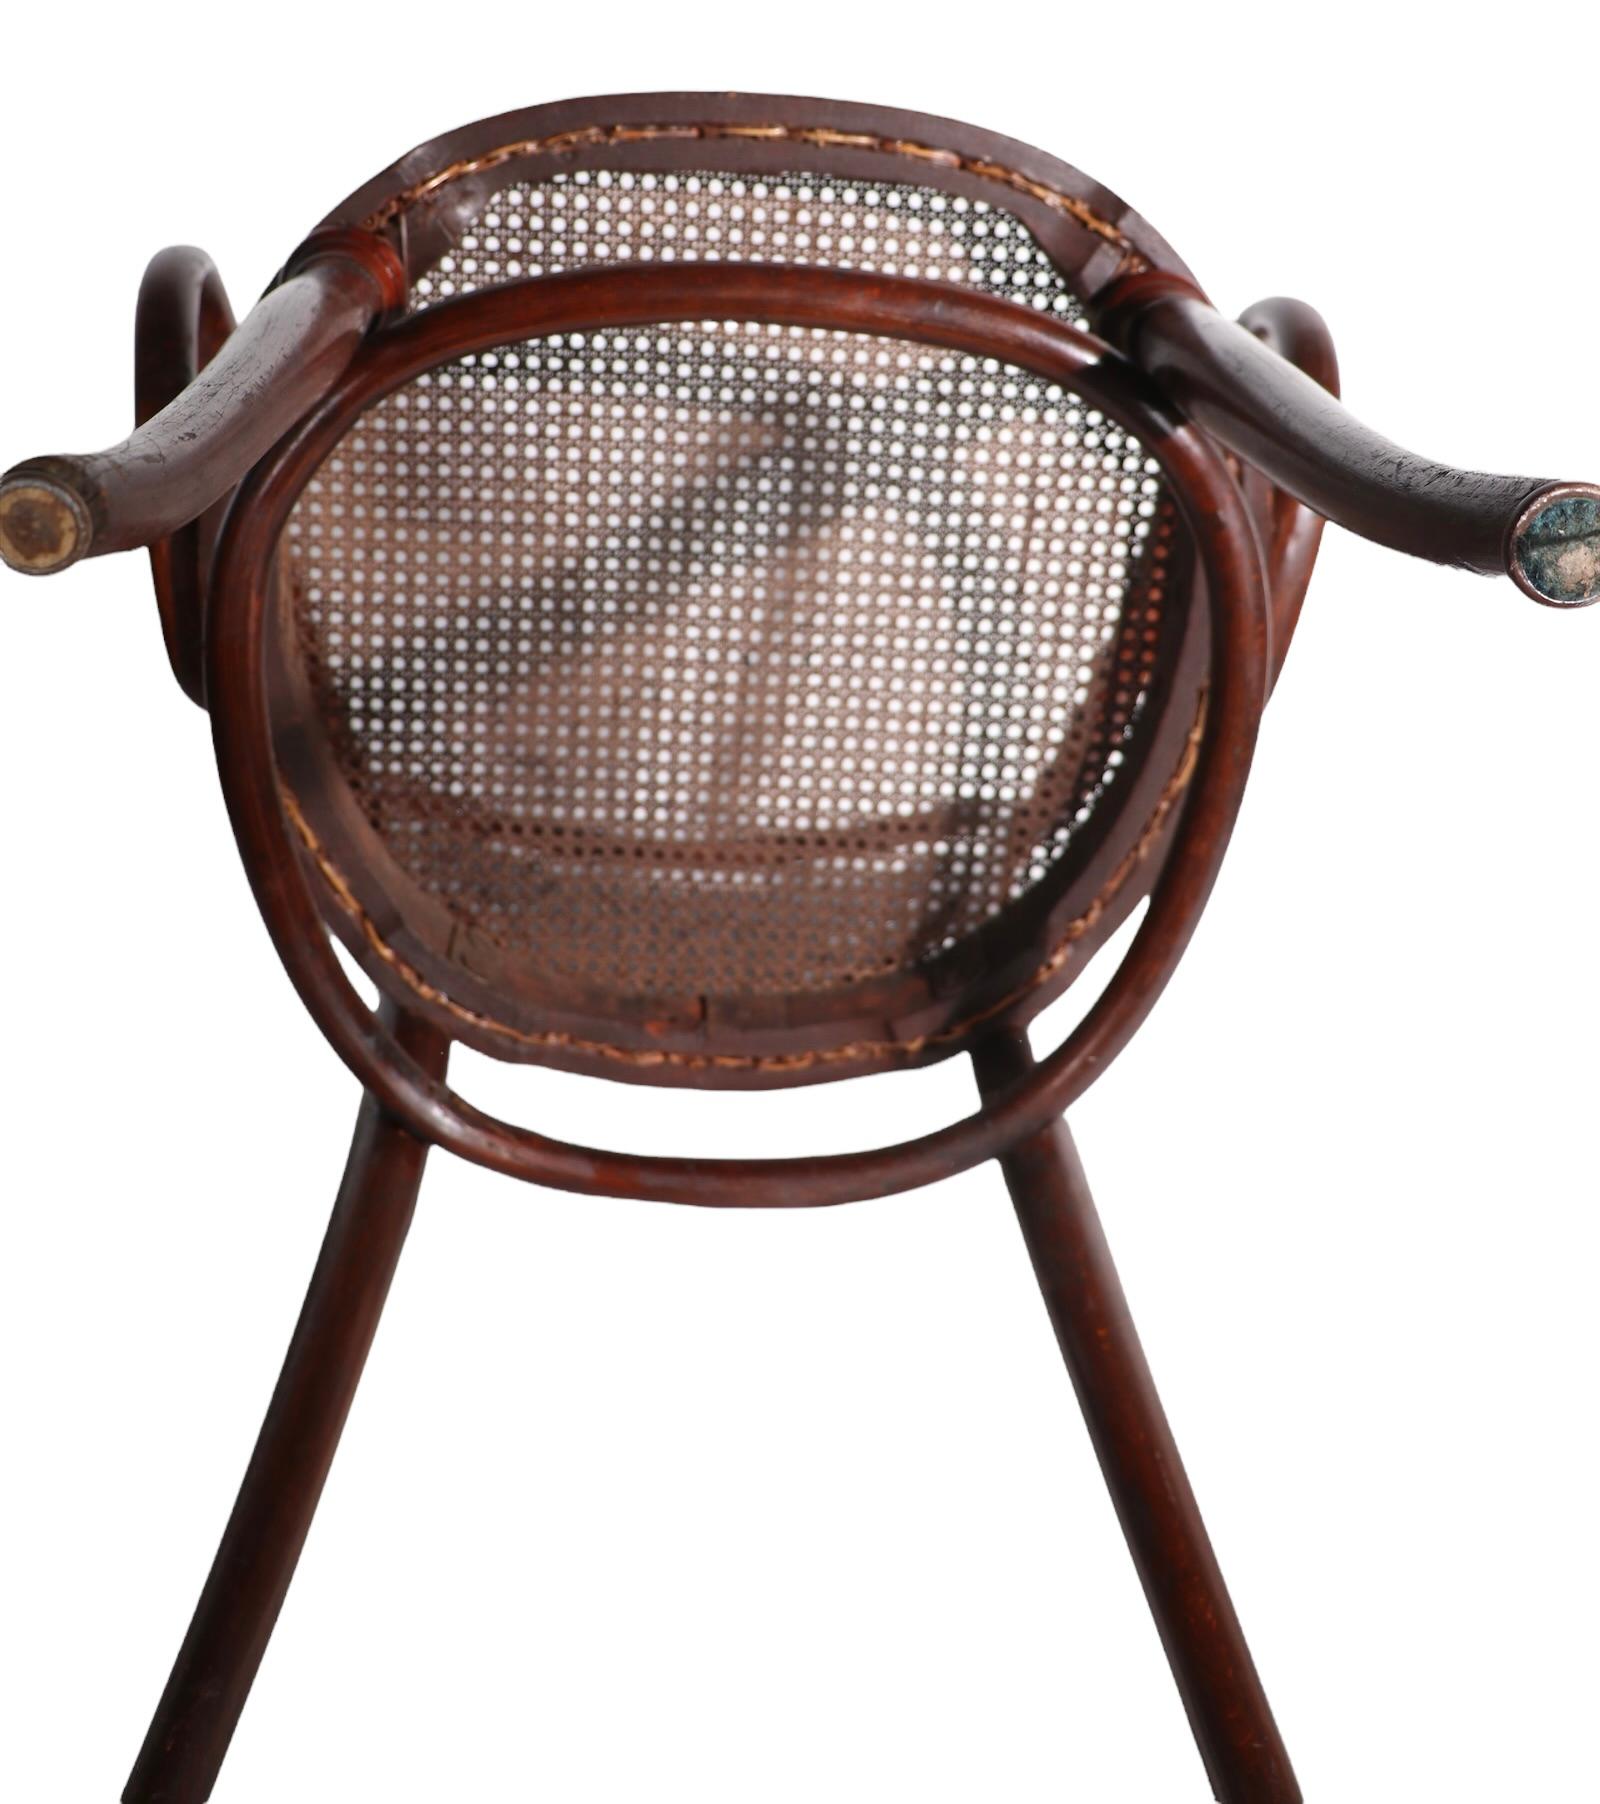 Period Vienna Secessionist bentwood armchair, attributed to J&J Kohn in the style of Thonet, and Fischel. The chair is in very fine condition, clean and ready ton use, we have had the canning professionally replaced. Early Modernist design still